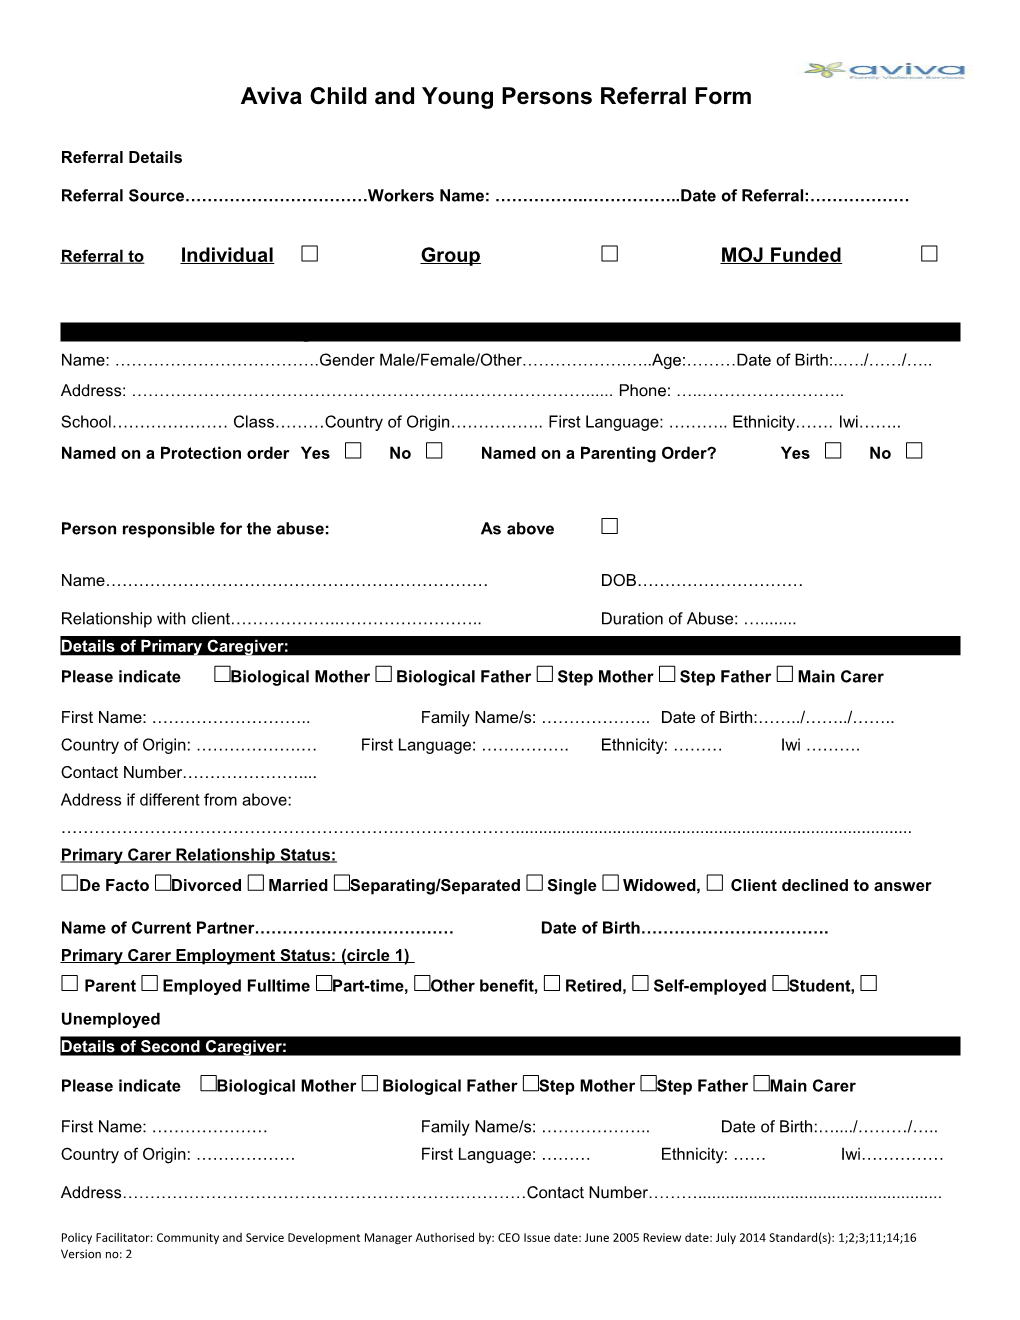 Aviva Child and Young Persons Referral Form